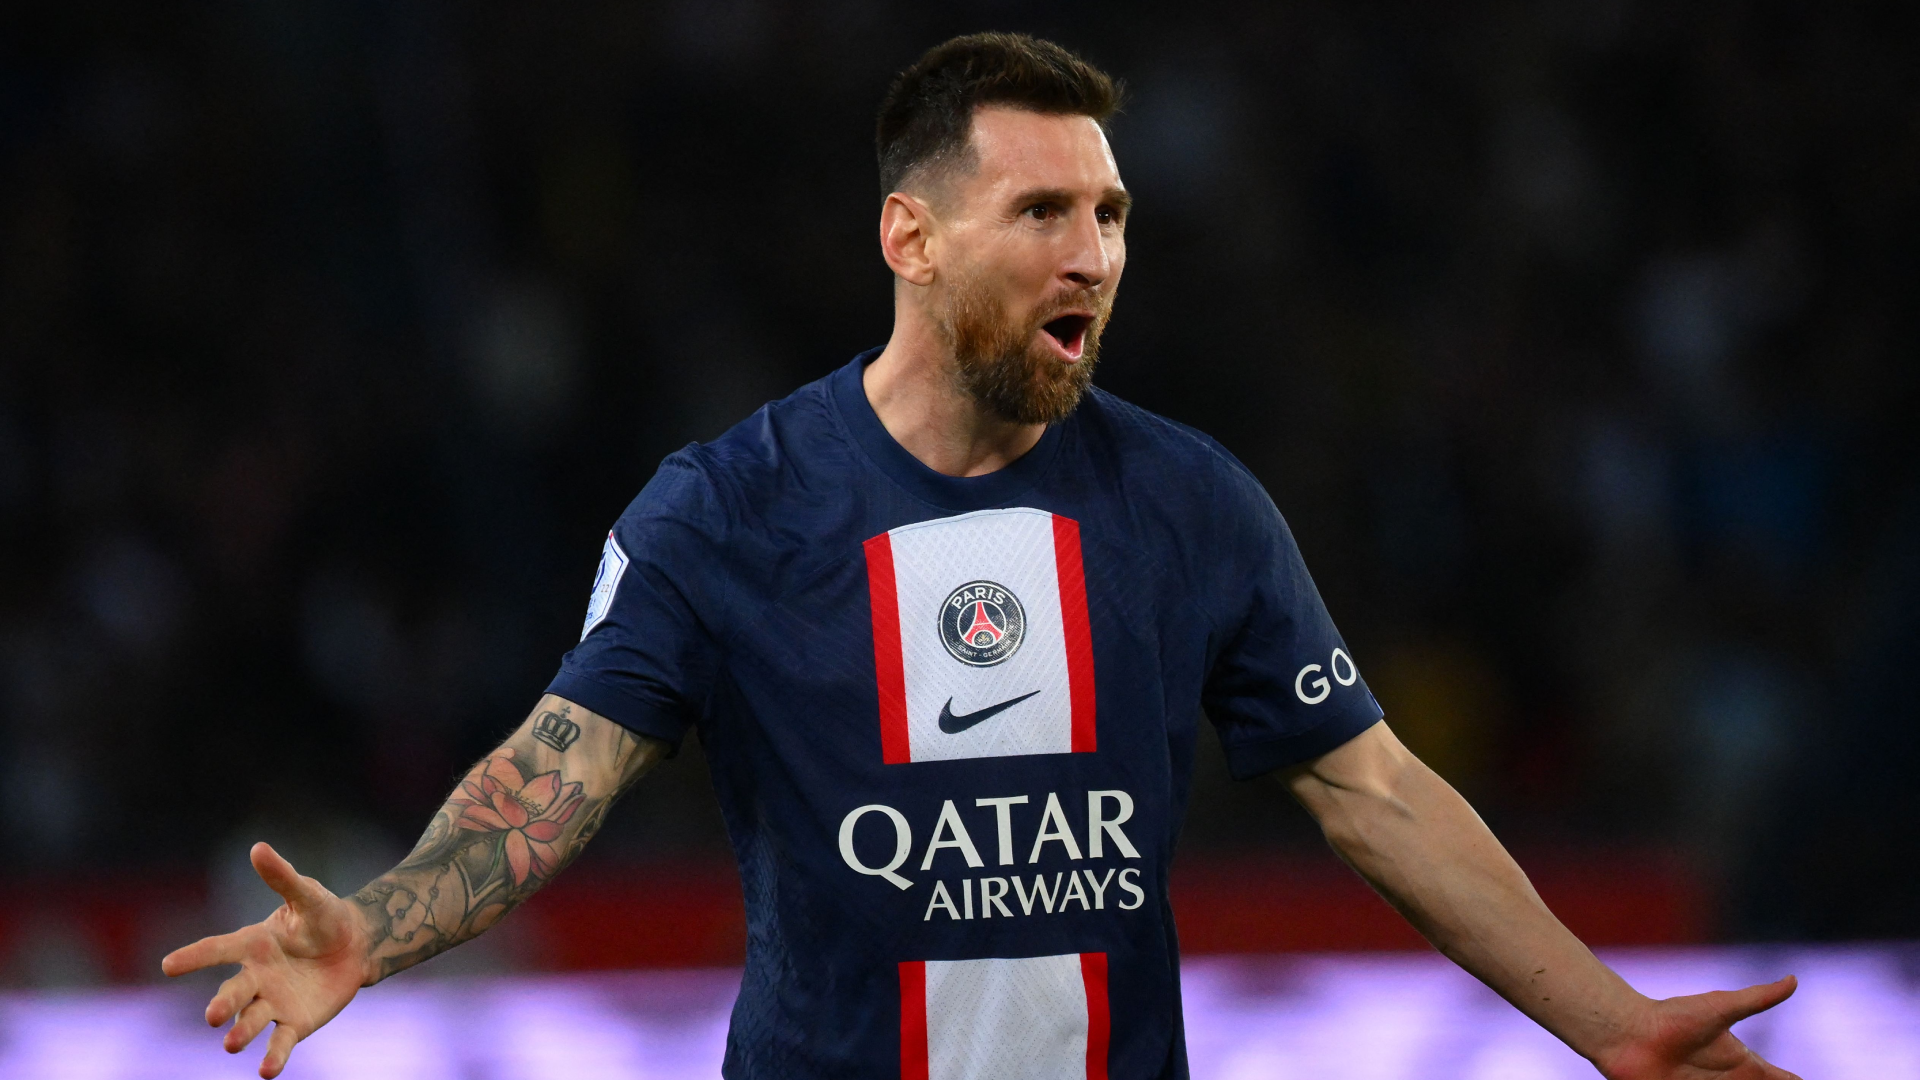 Barcelona transfer news and rumours today: Lionel Messi wants Camp Nou return | Goal.com UK